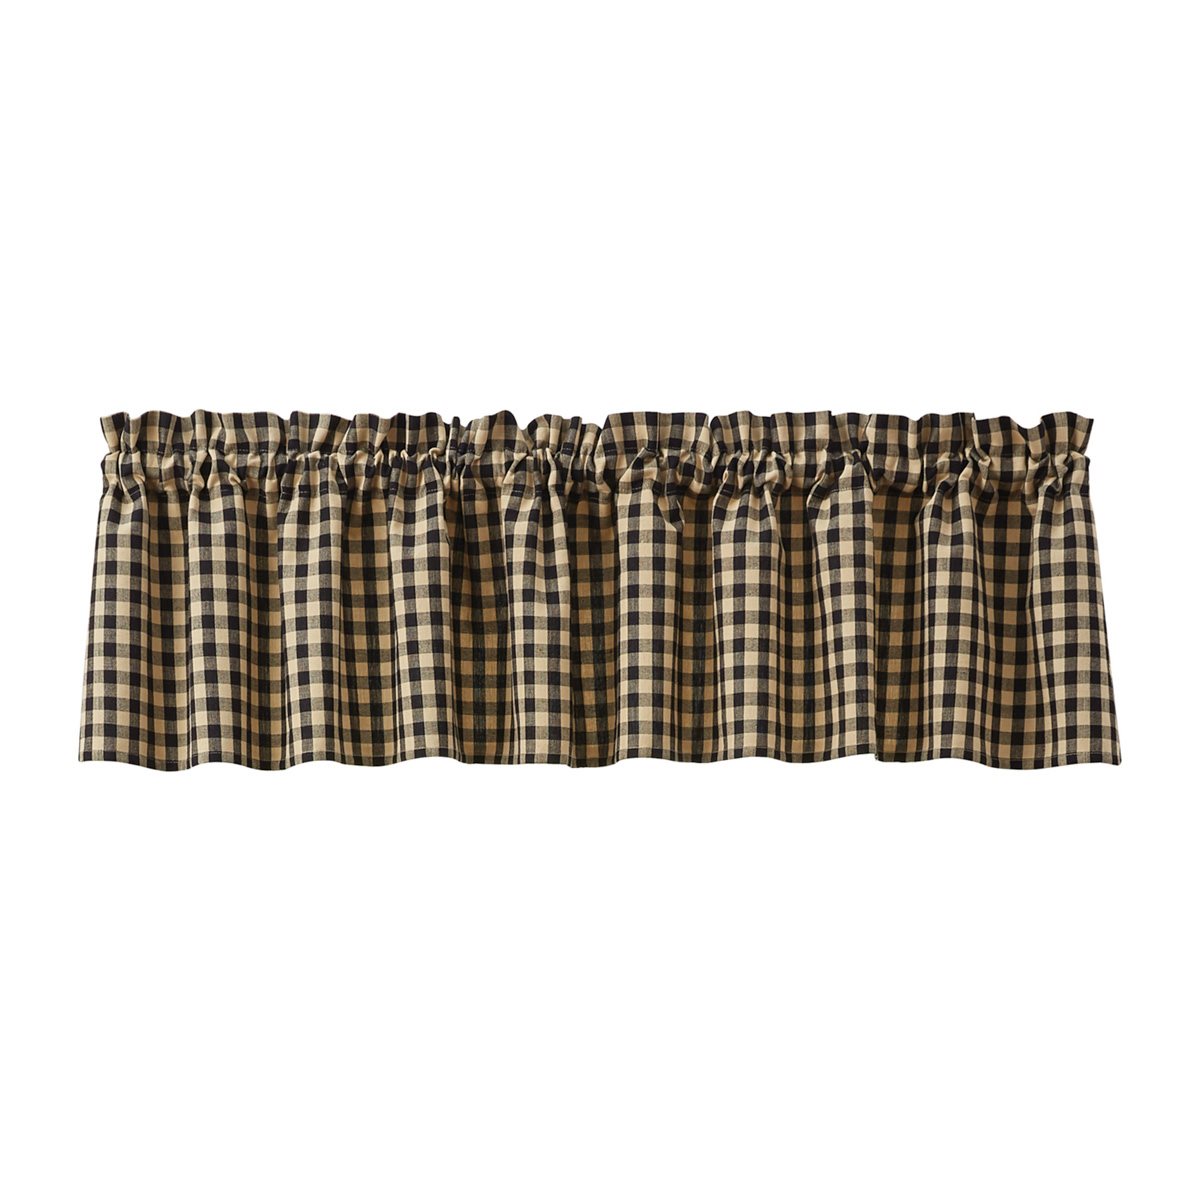 Berry Gingham Lined Valance 72X14